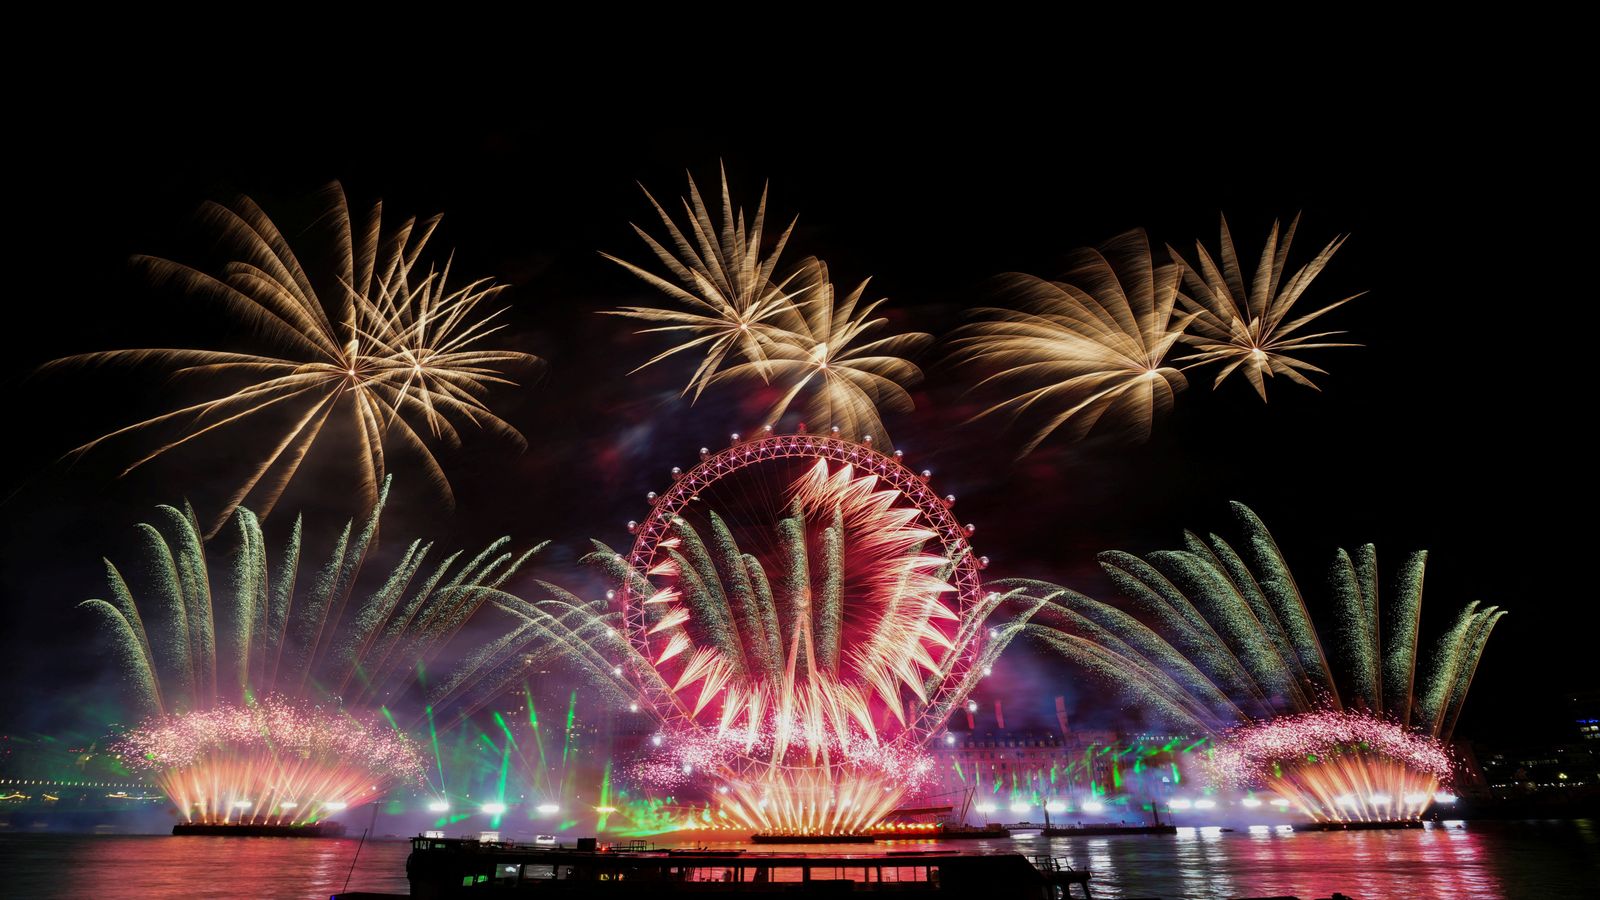 London's New Year fireworks include tribute to the Queen and show of